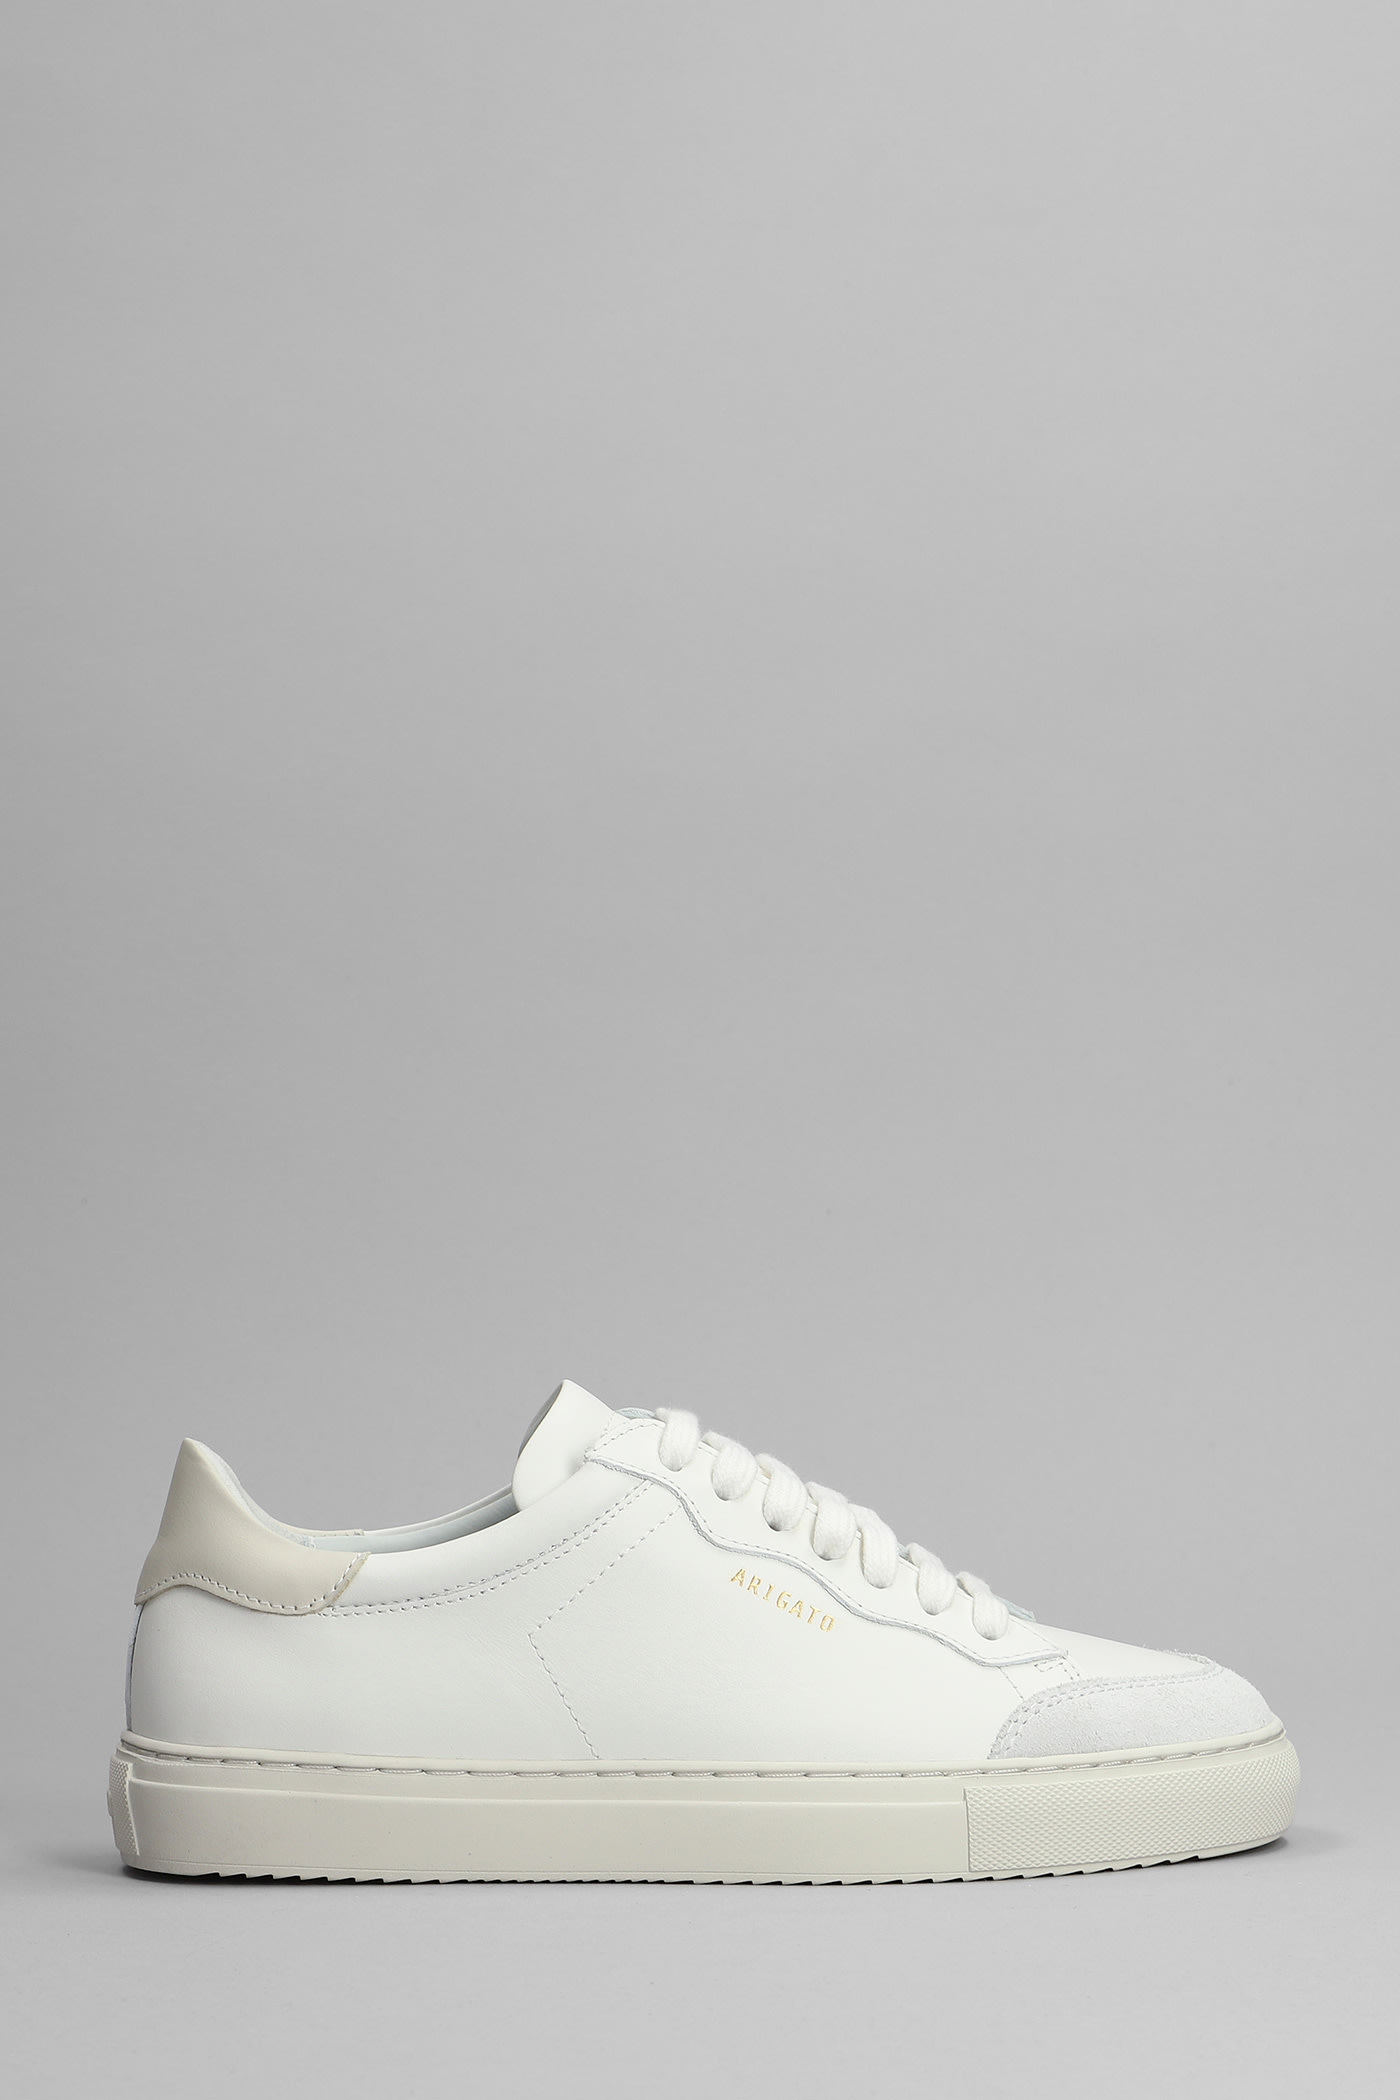 Axel Arigato Clean 180 Sneakers In White Leather